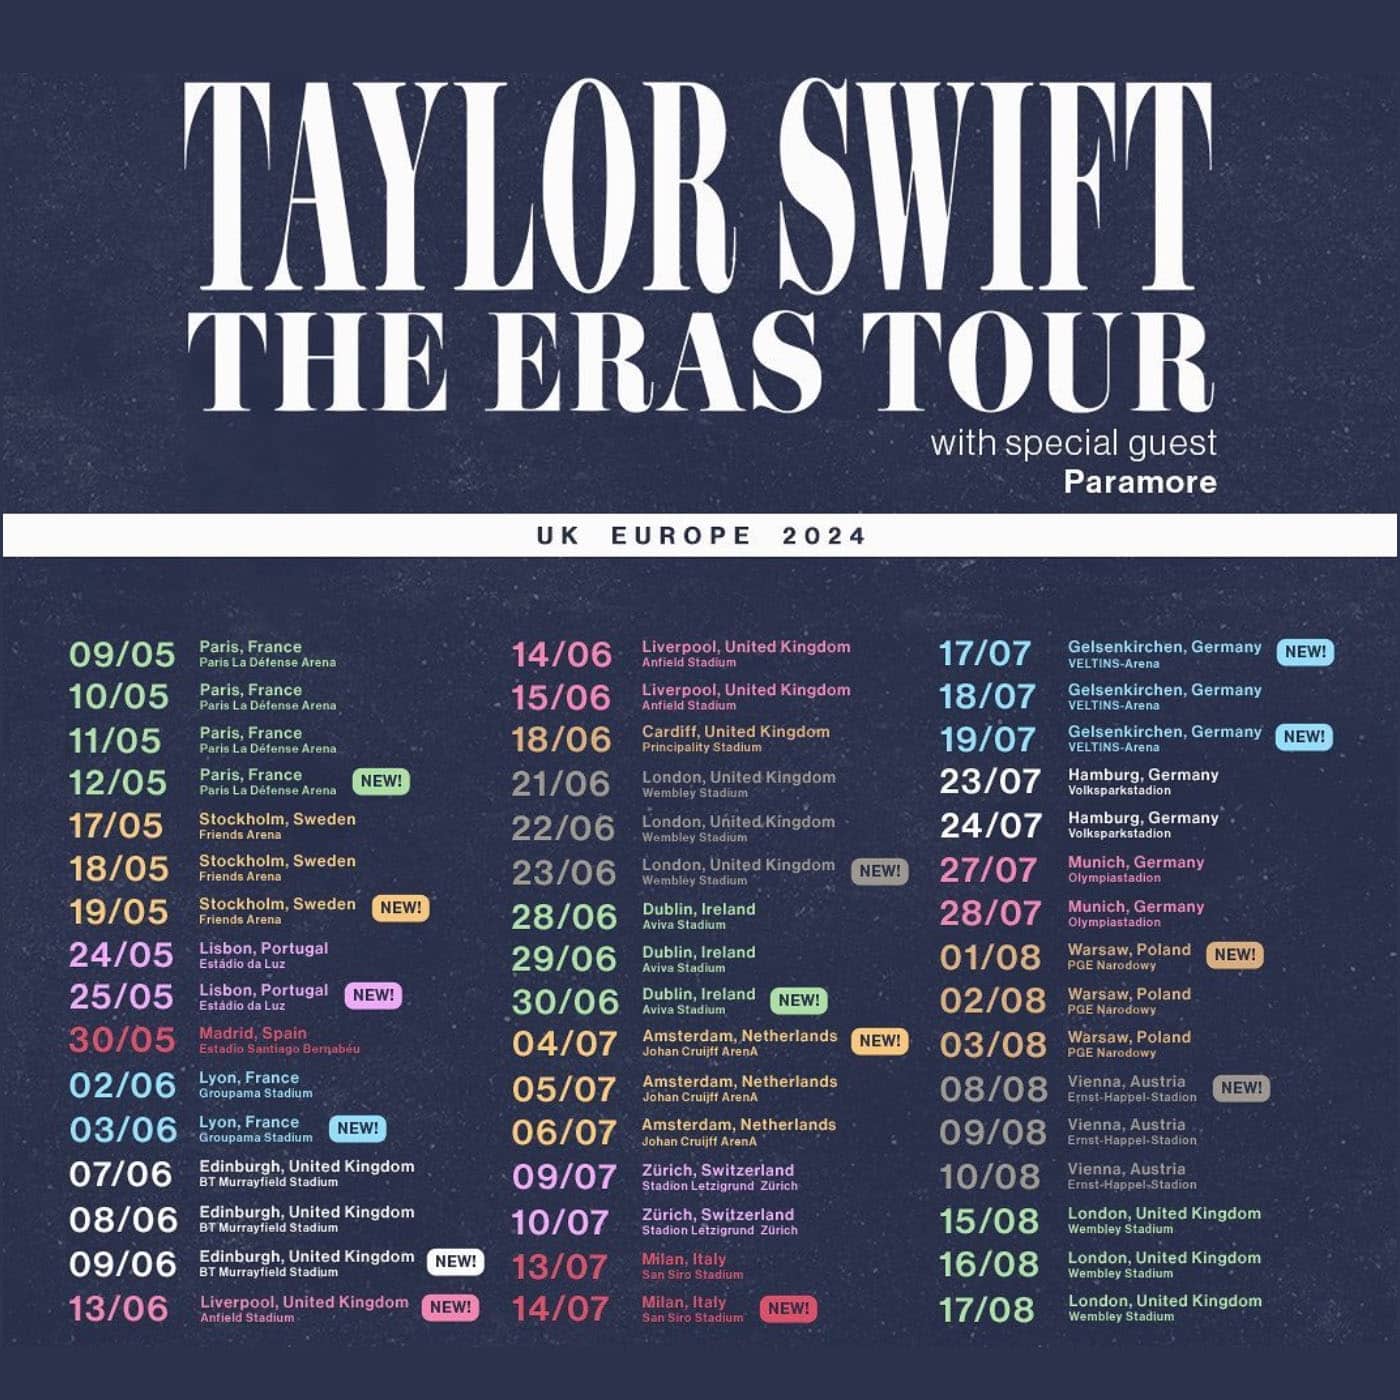 taylor swift the eras tour paramore hayley williams oslo norway norge